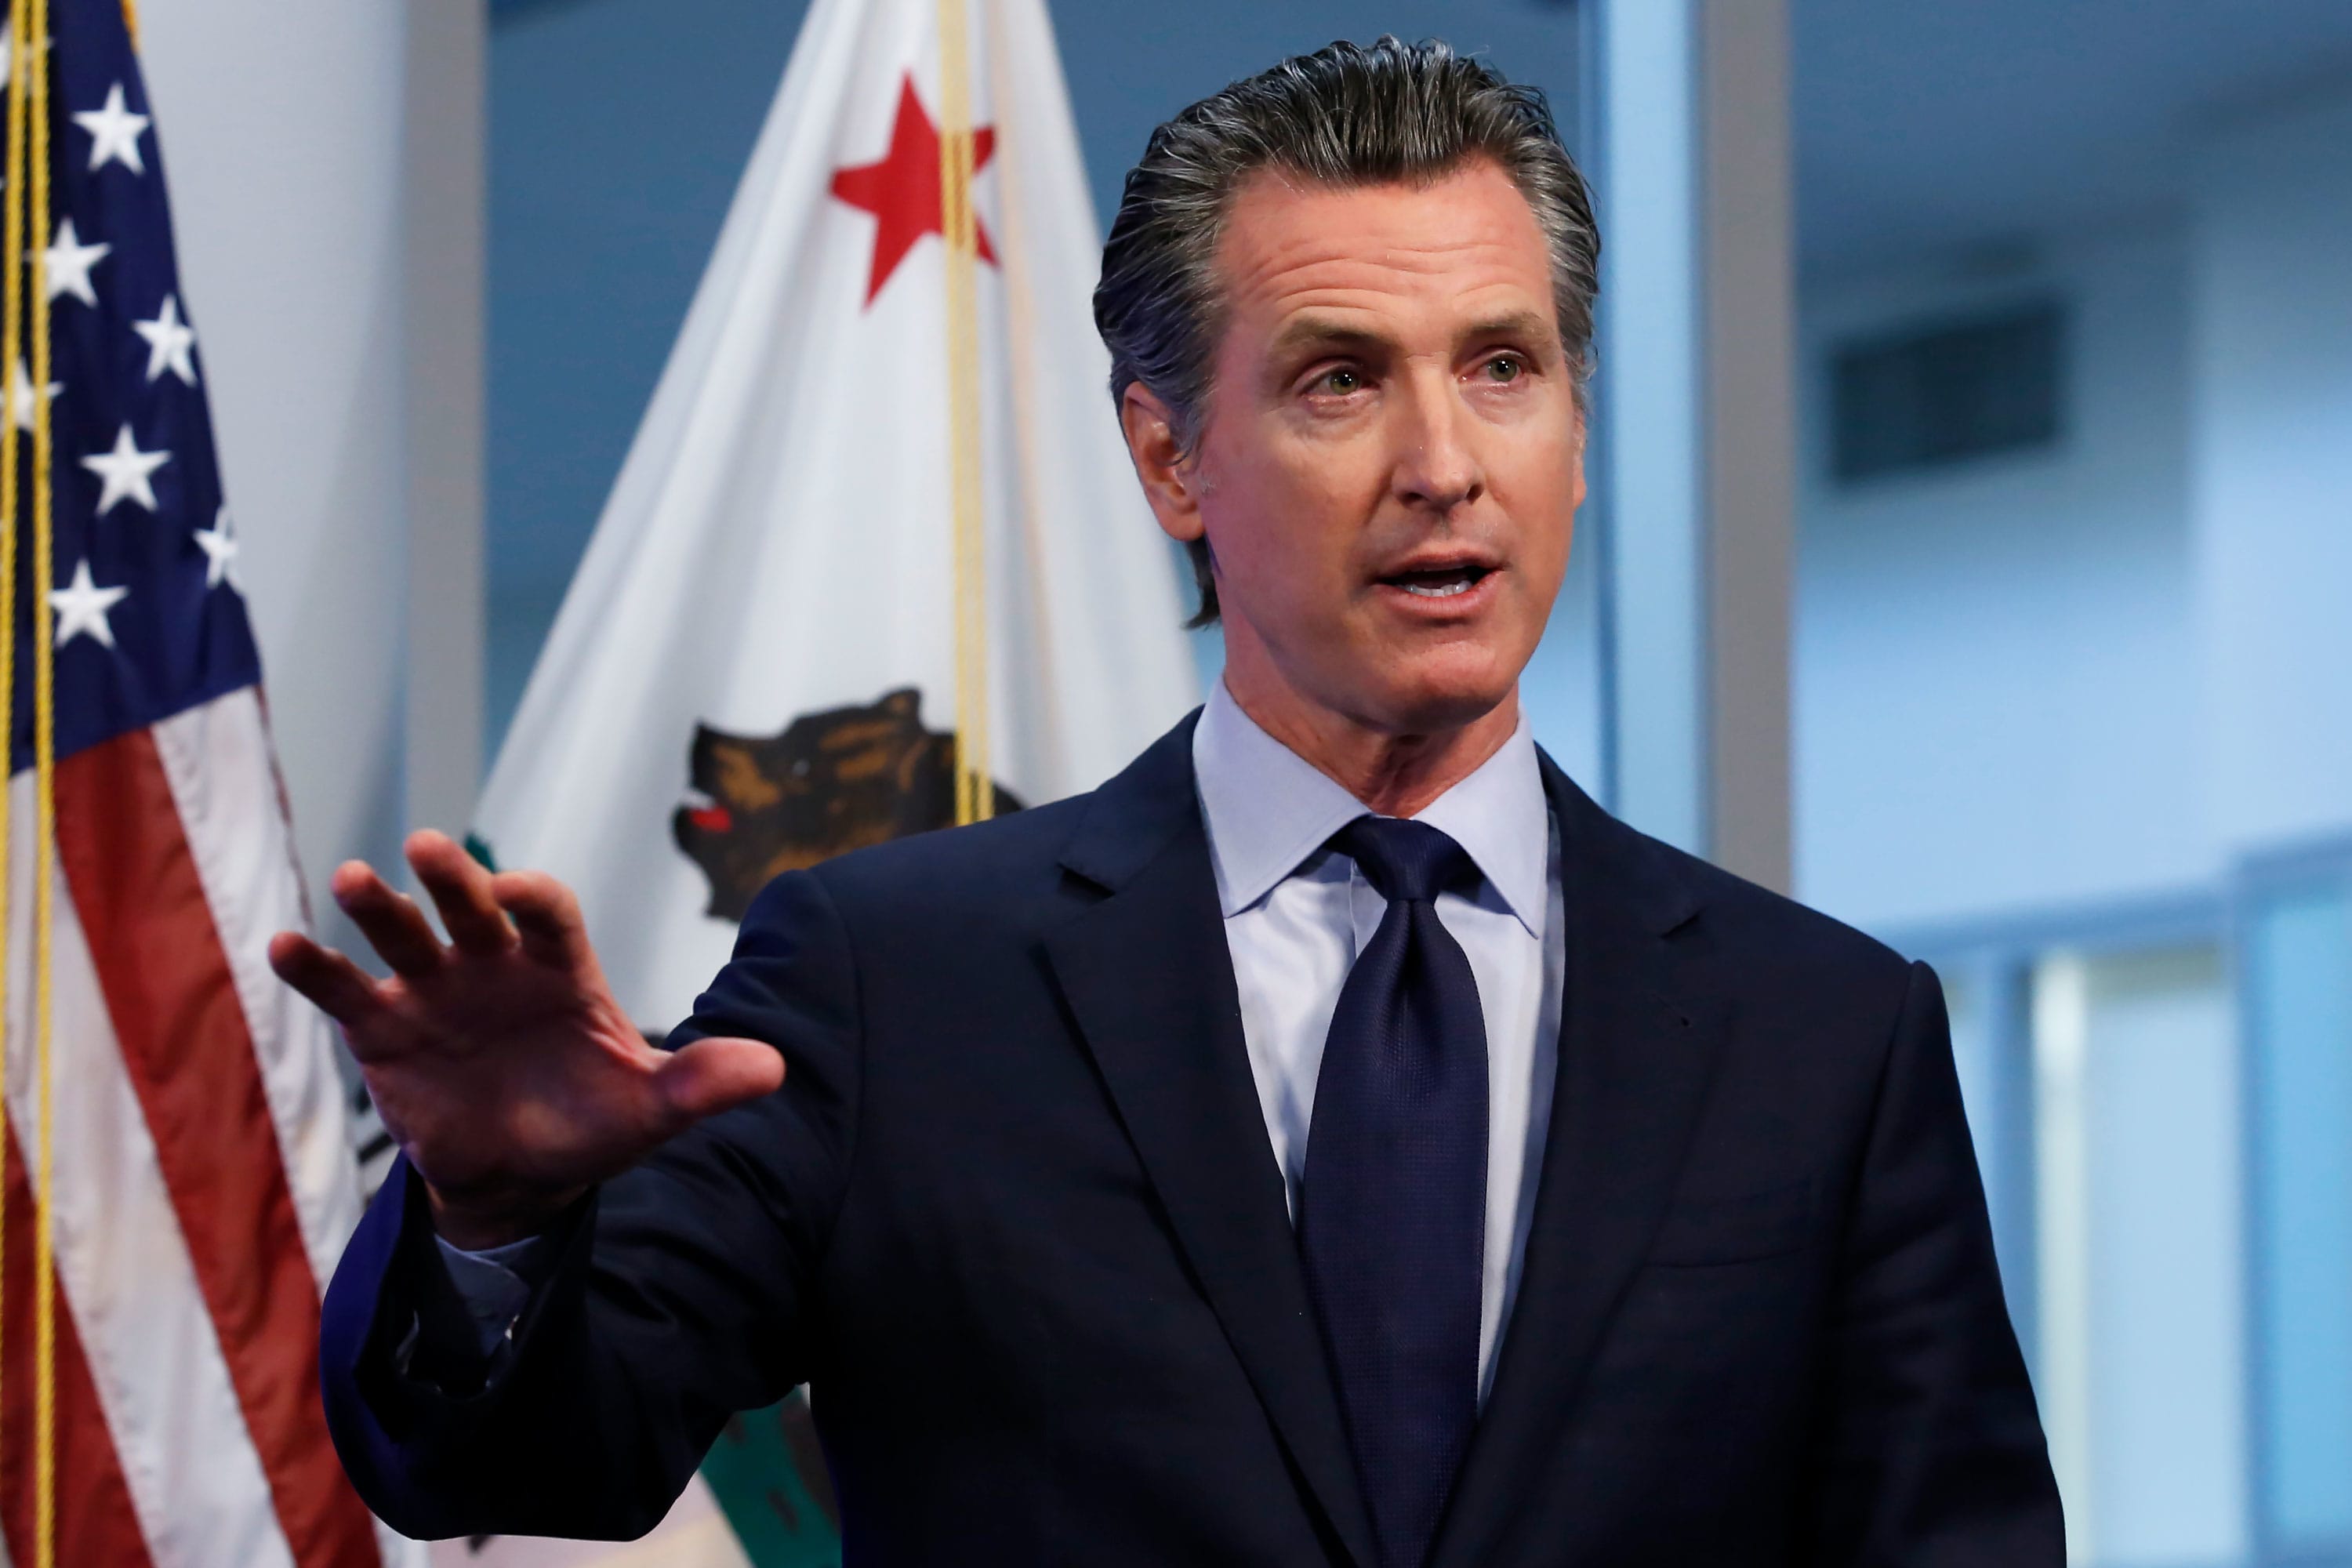 California Gov. Gavin Newsom says some businesses will reopen Friday, with conditions